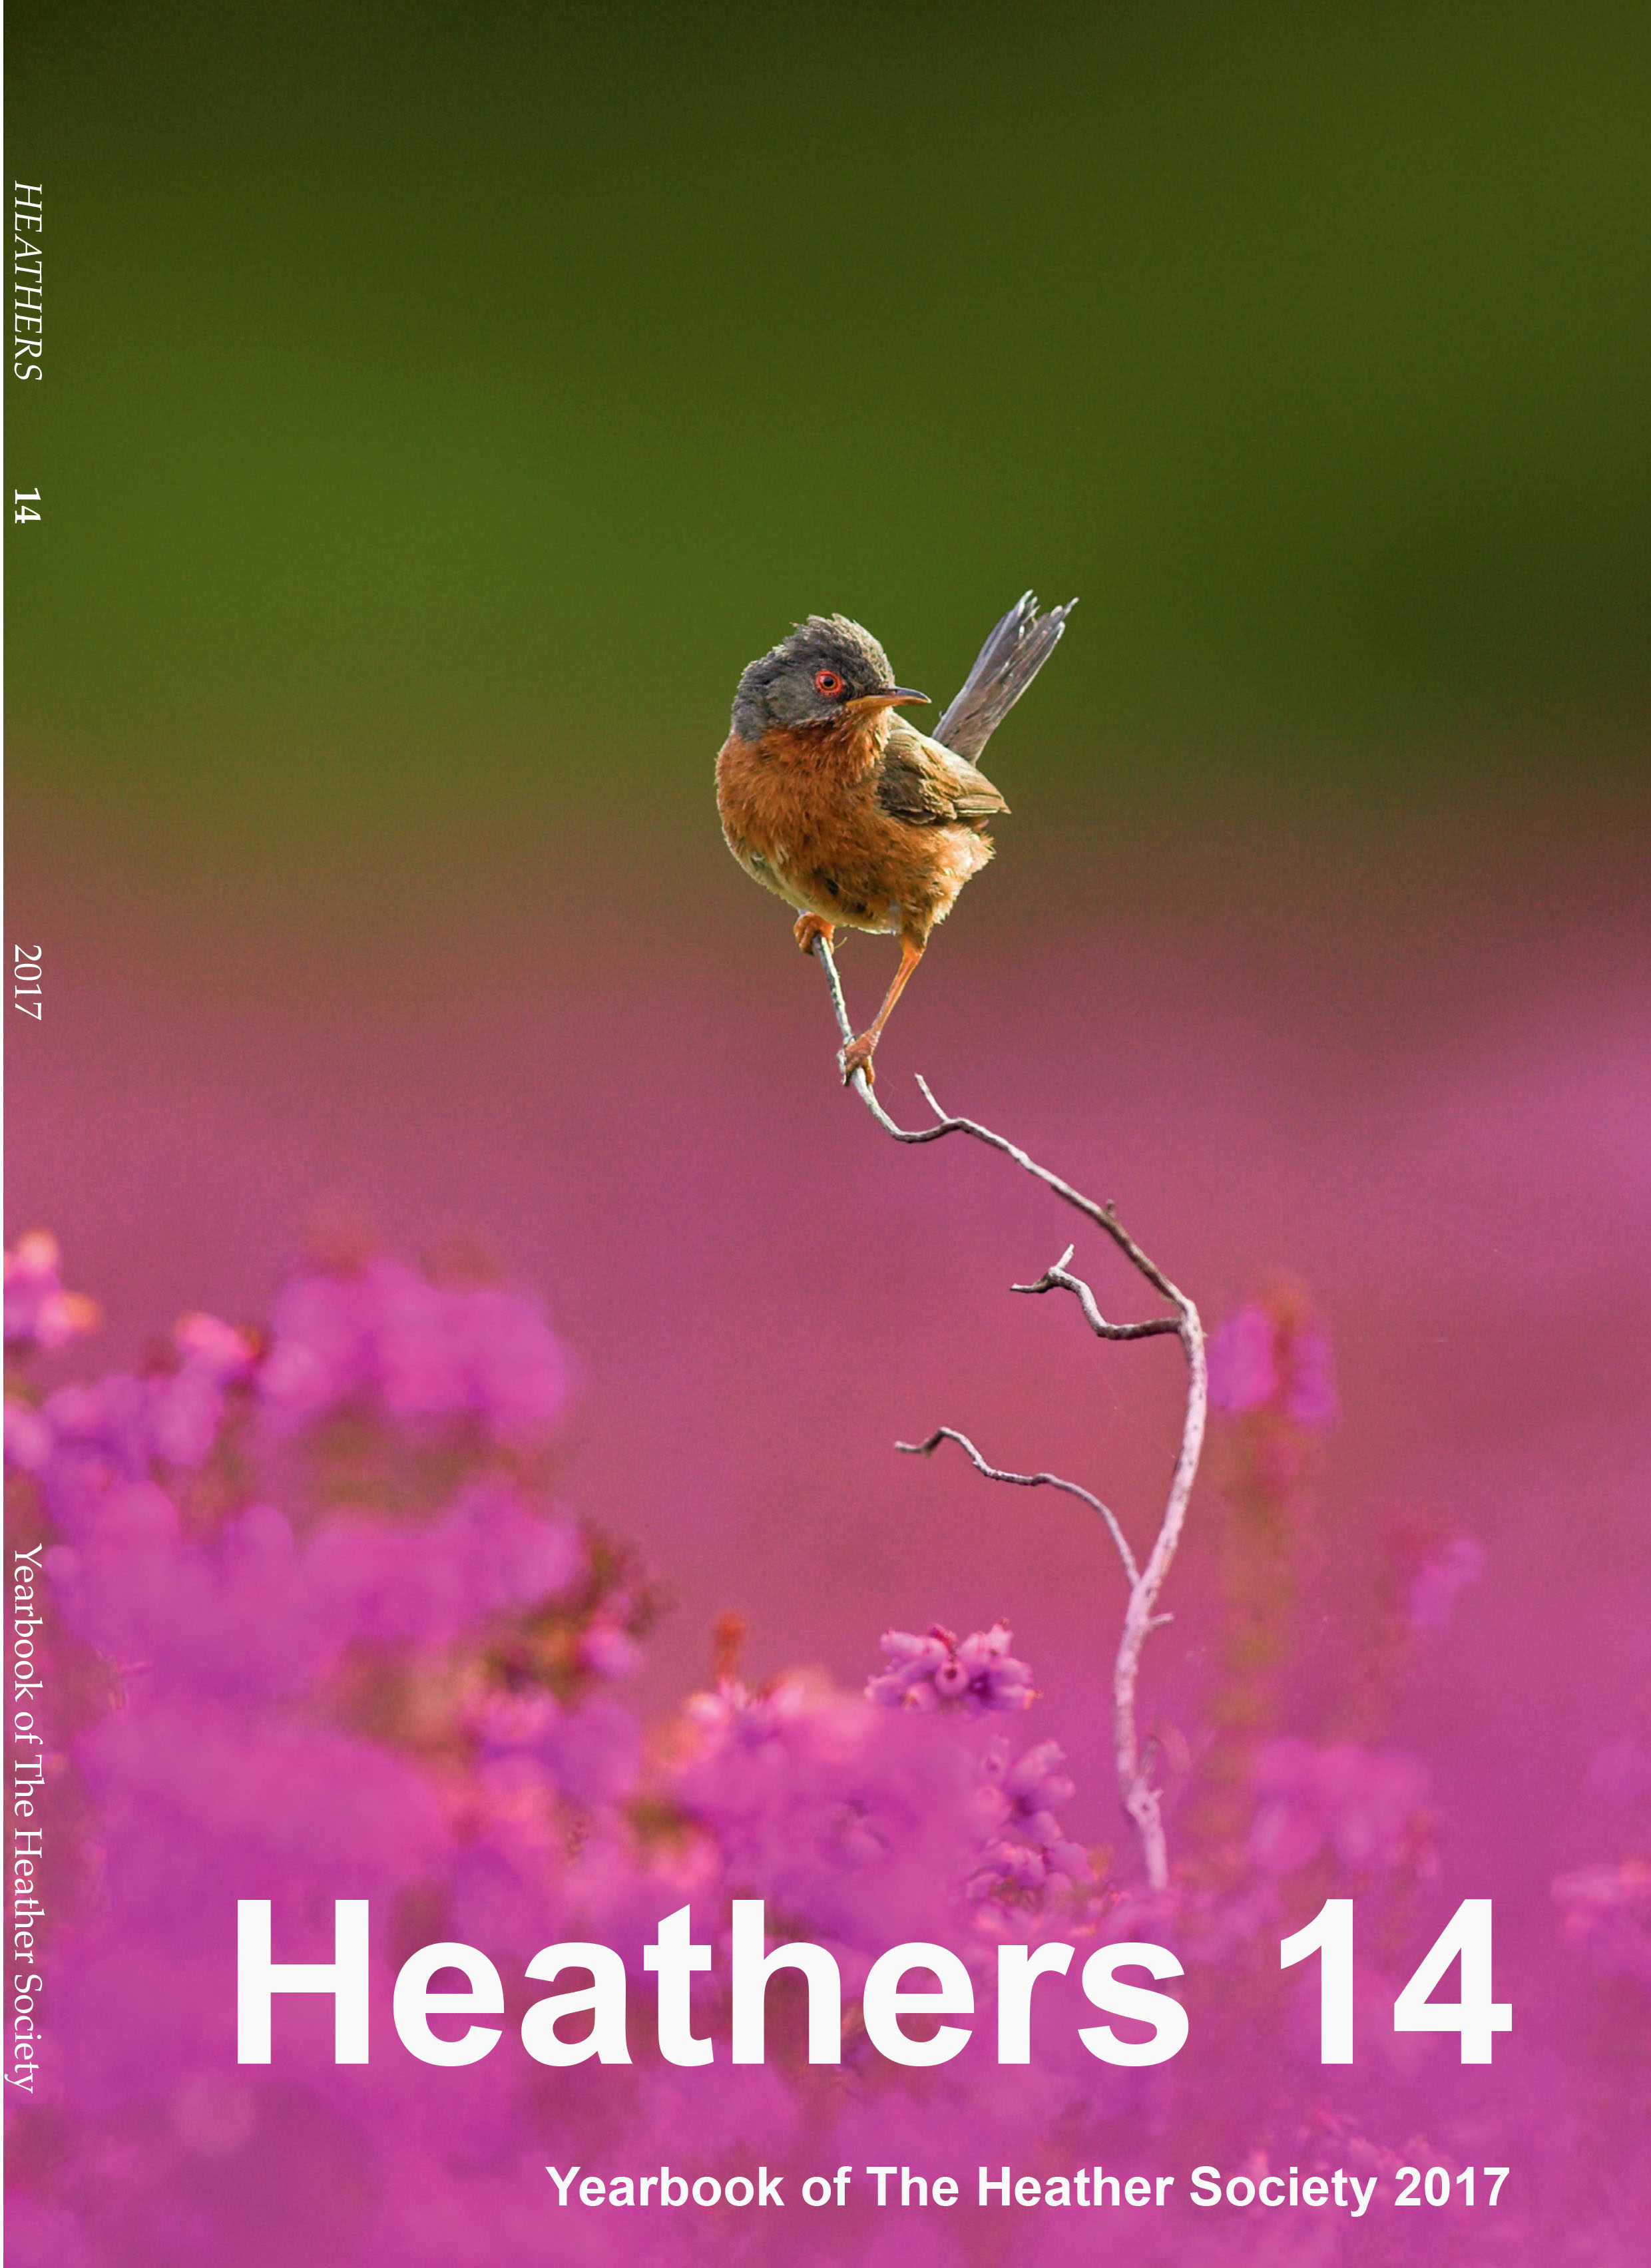 Heathers 14: Yearbook of the Heather Society 2017